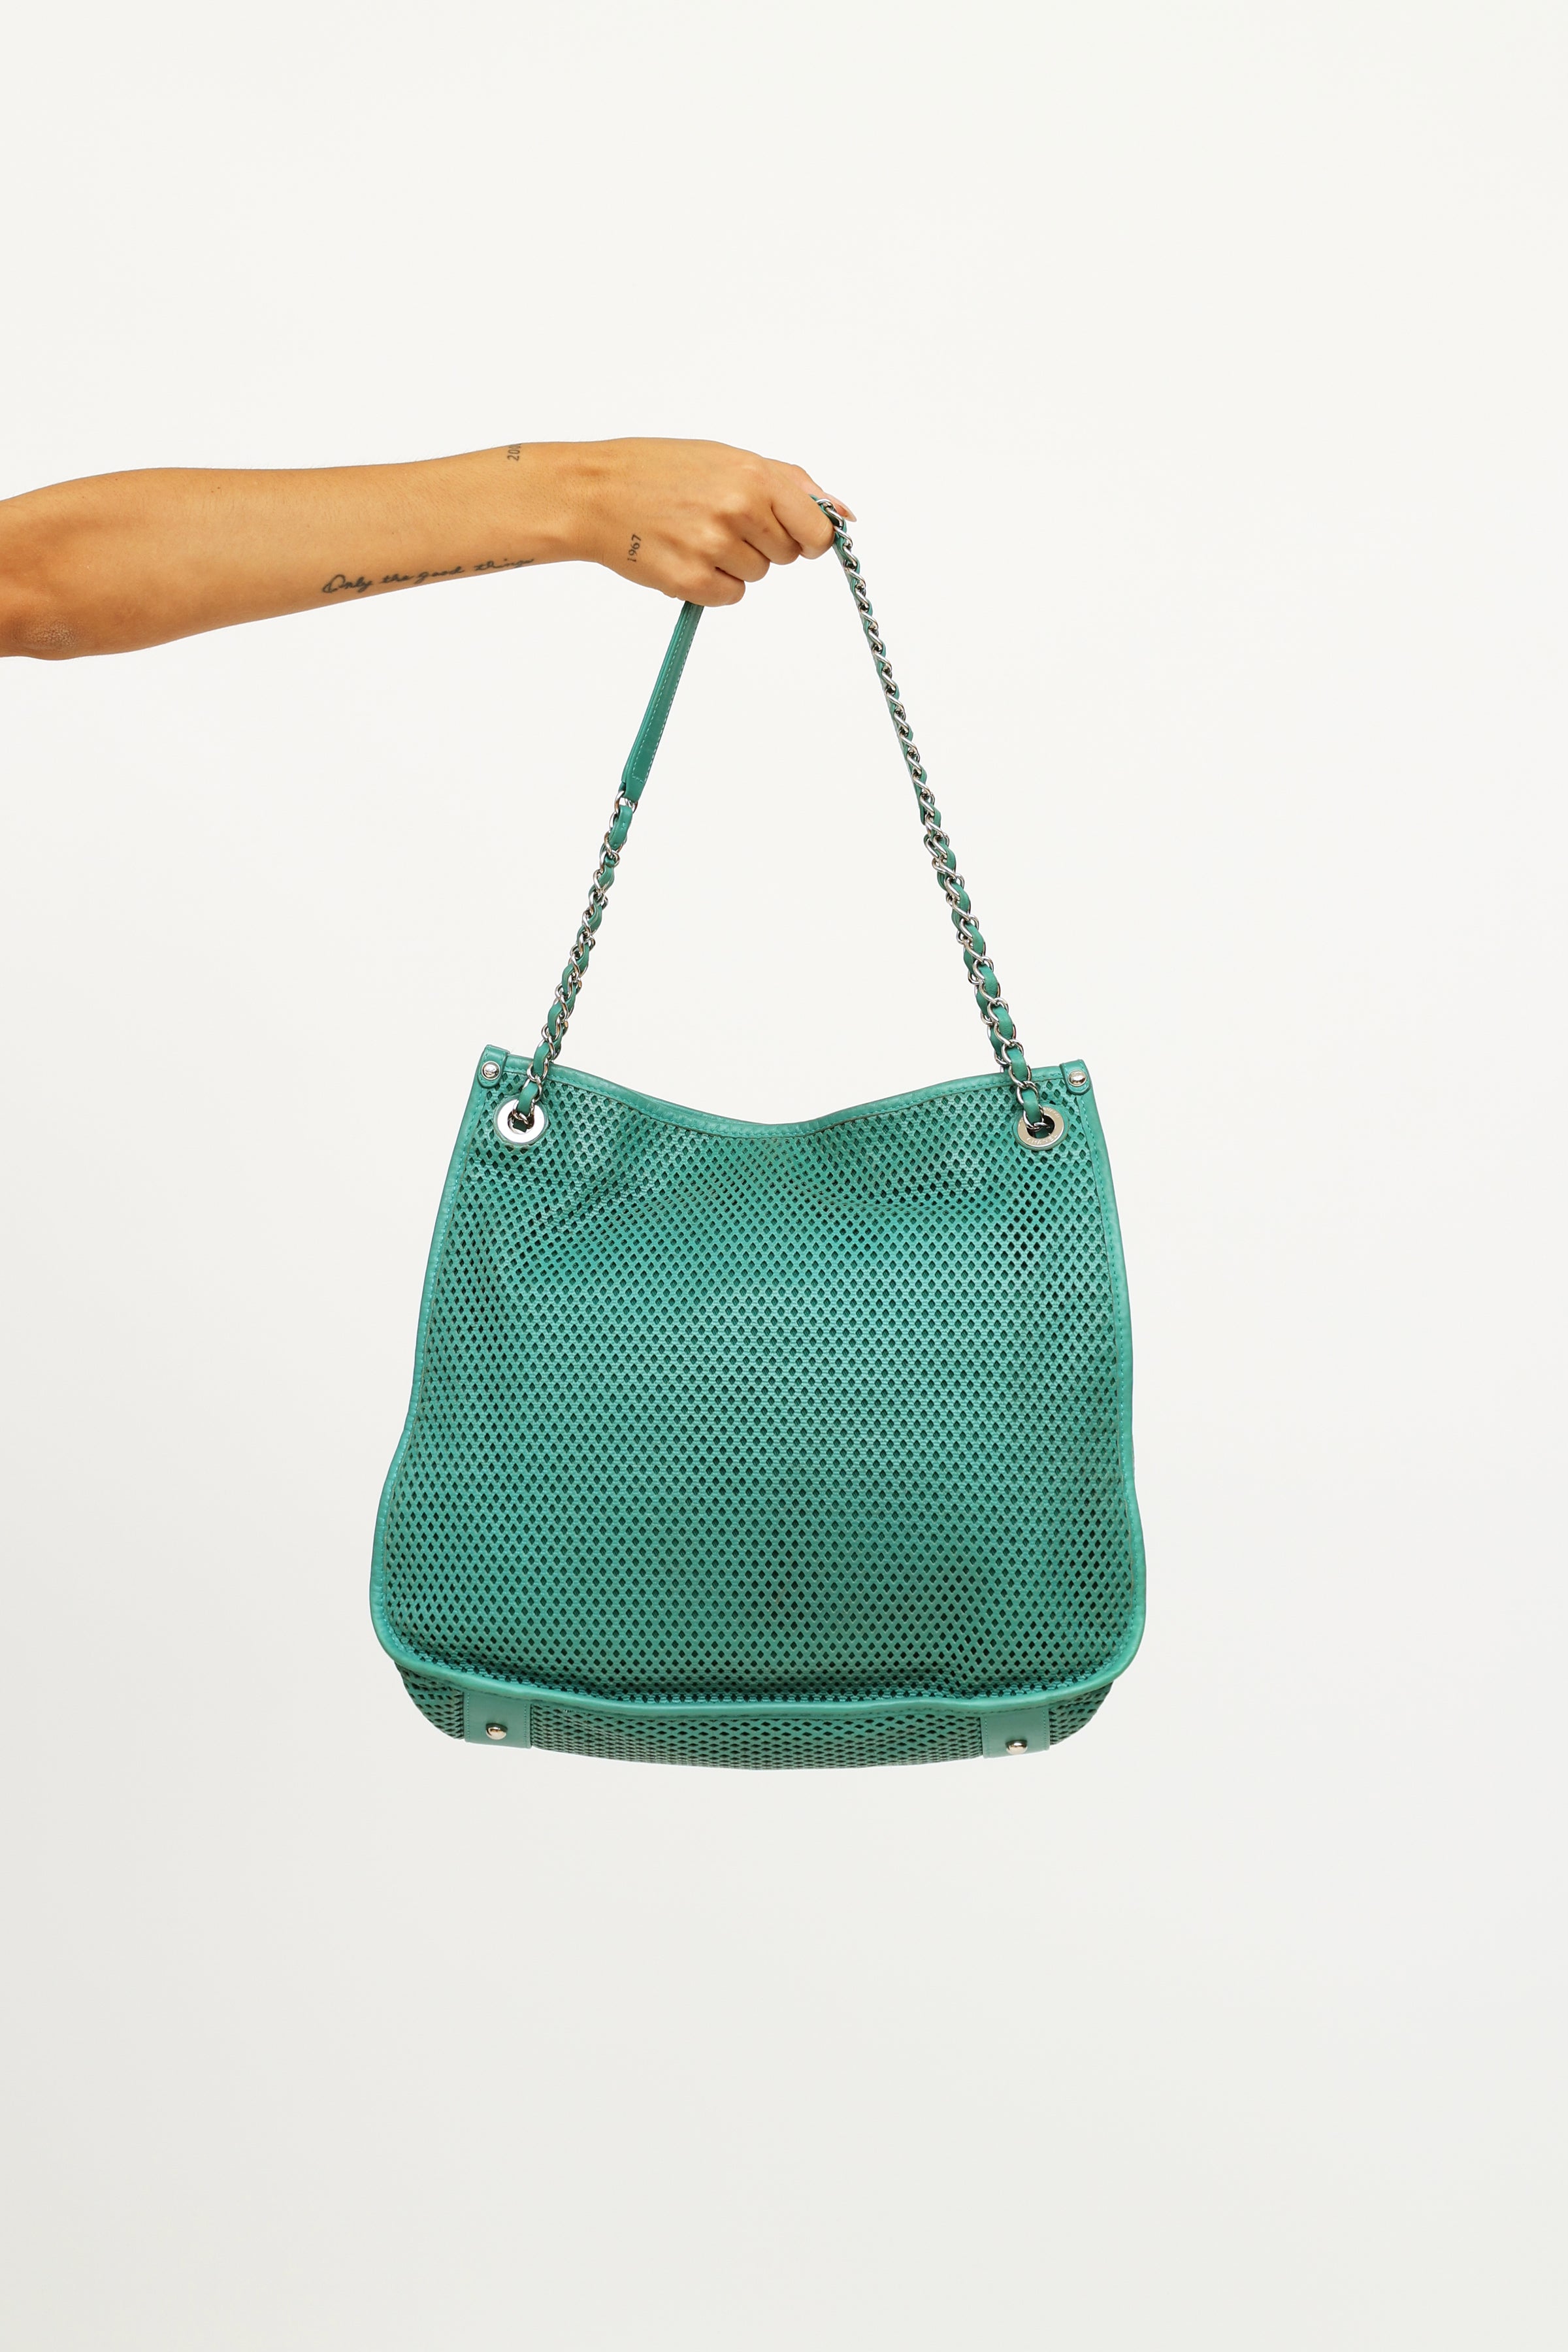 Chanel // Green Up in the Air Perforated Tote Bag – VSP Consignment